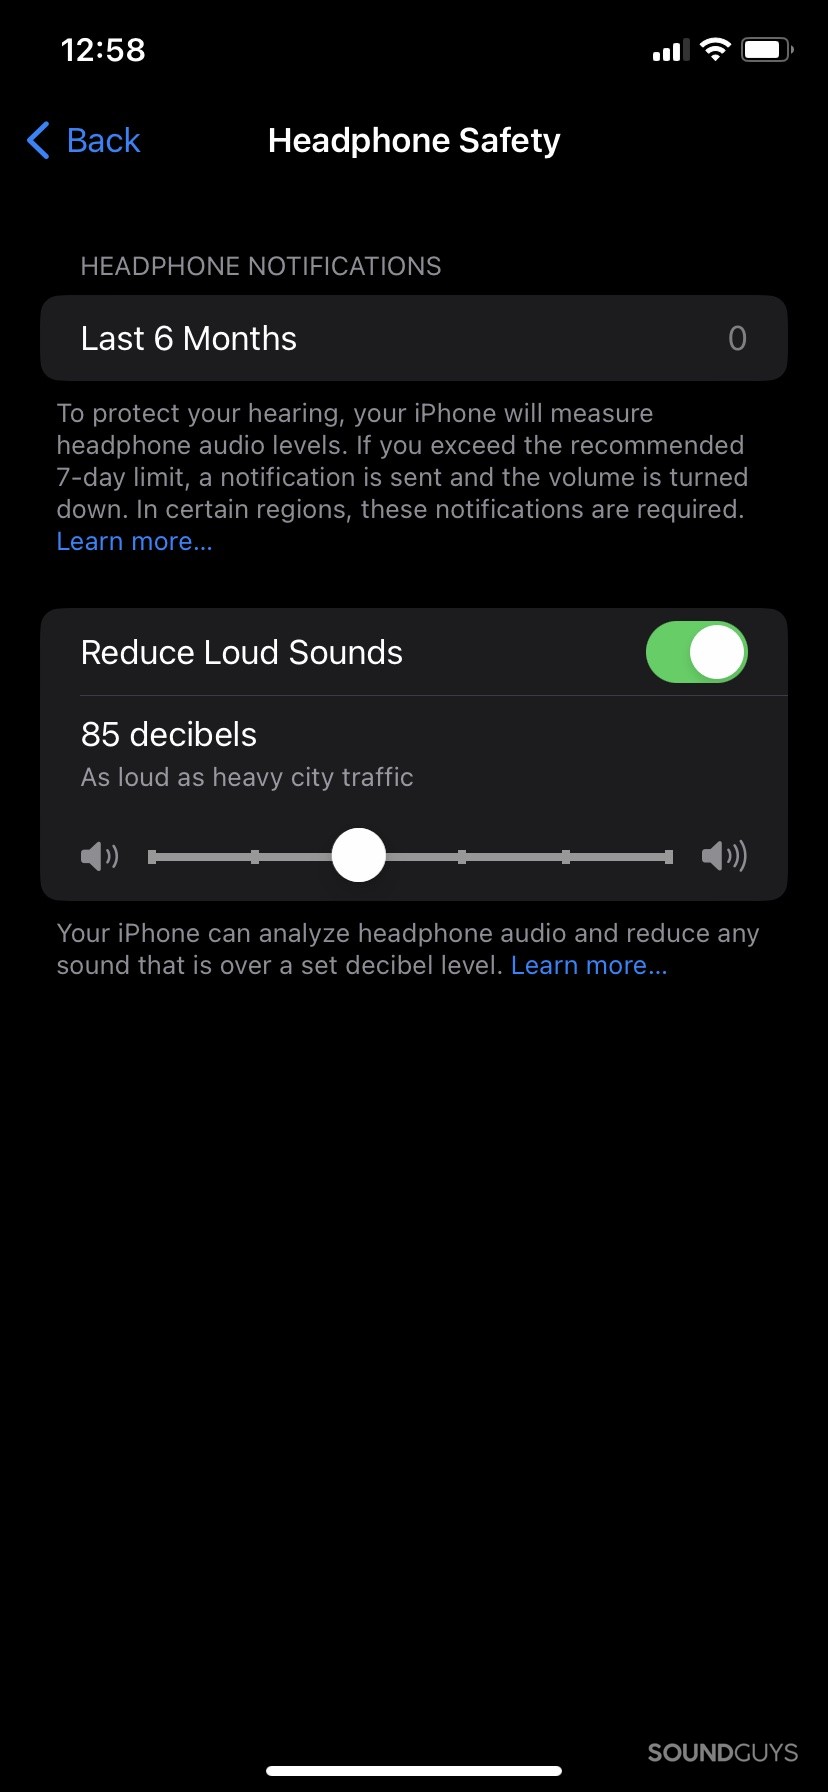 The volume limiting section of the sound settings in the Settings app for iOS.